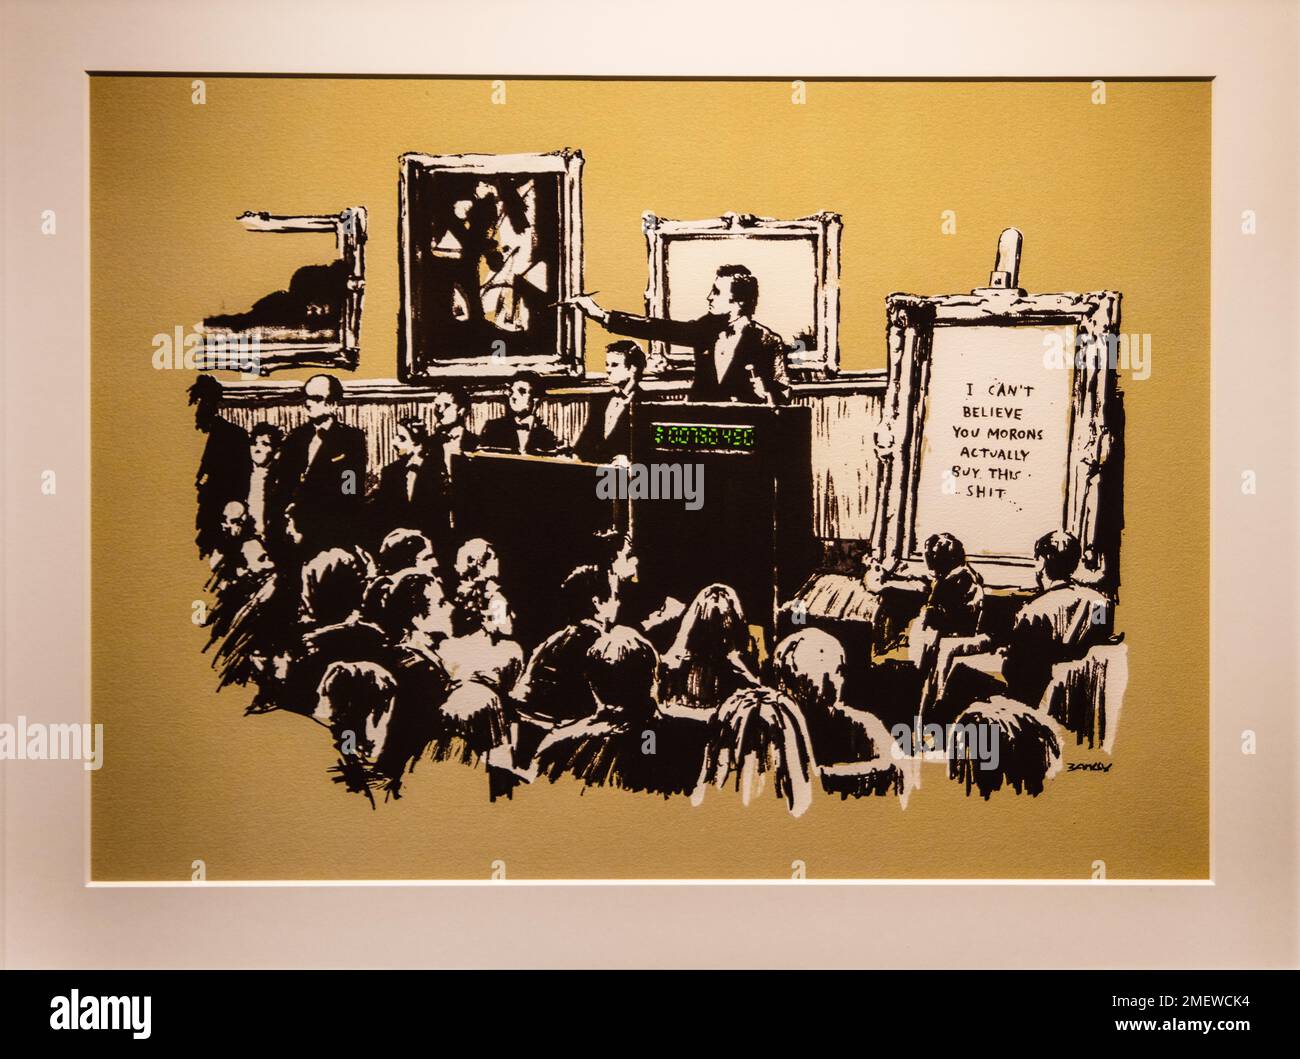 Morons, 2006, Banksy, exhibition about the street artist, Muelheim, Germany Stock Photo